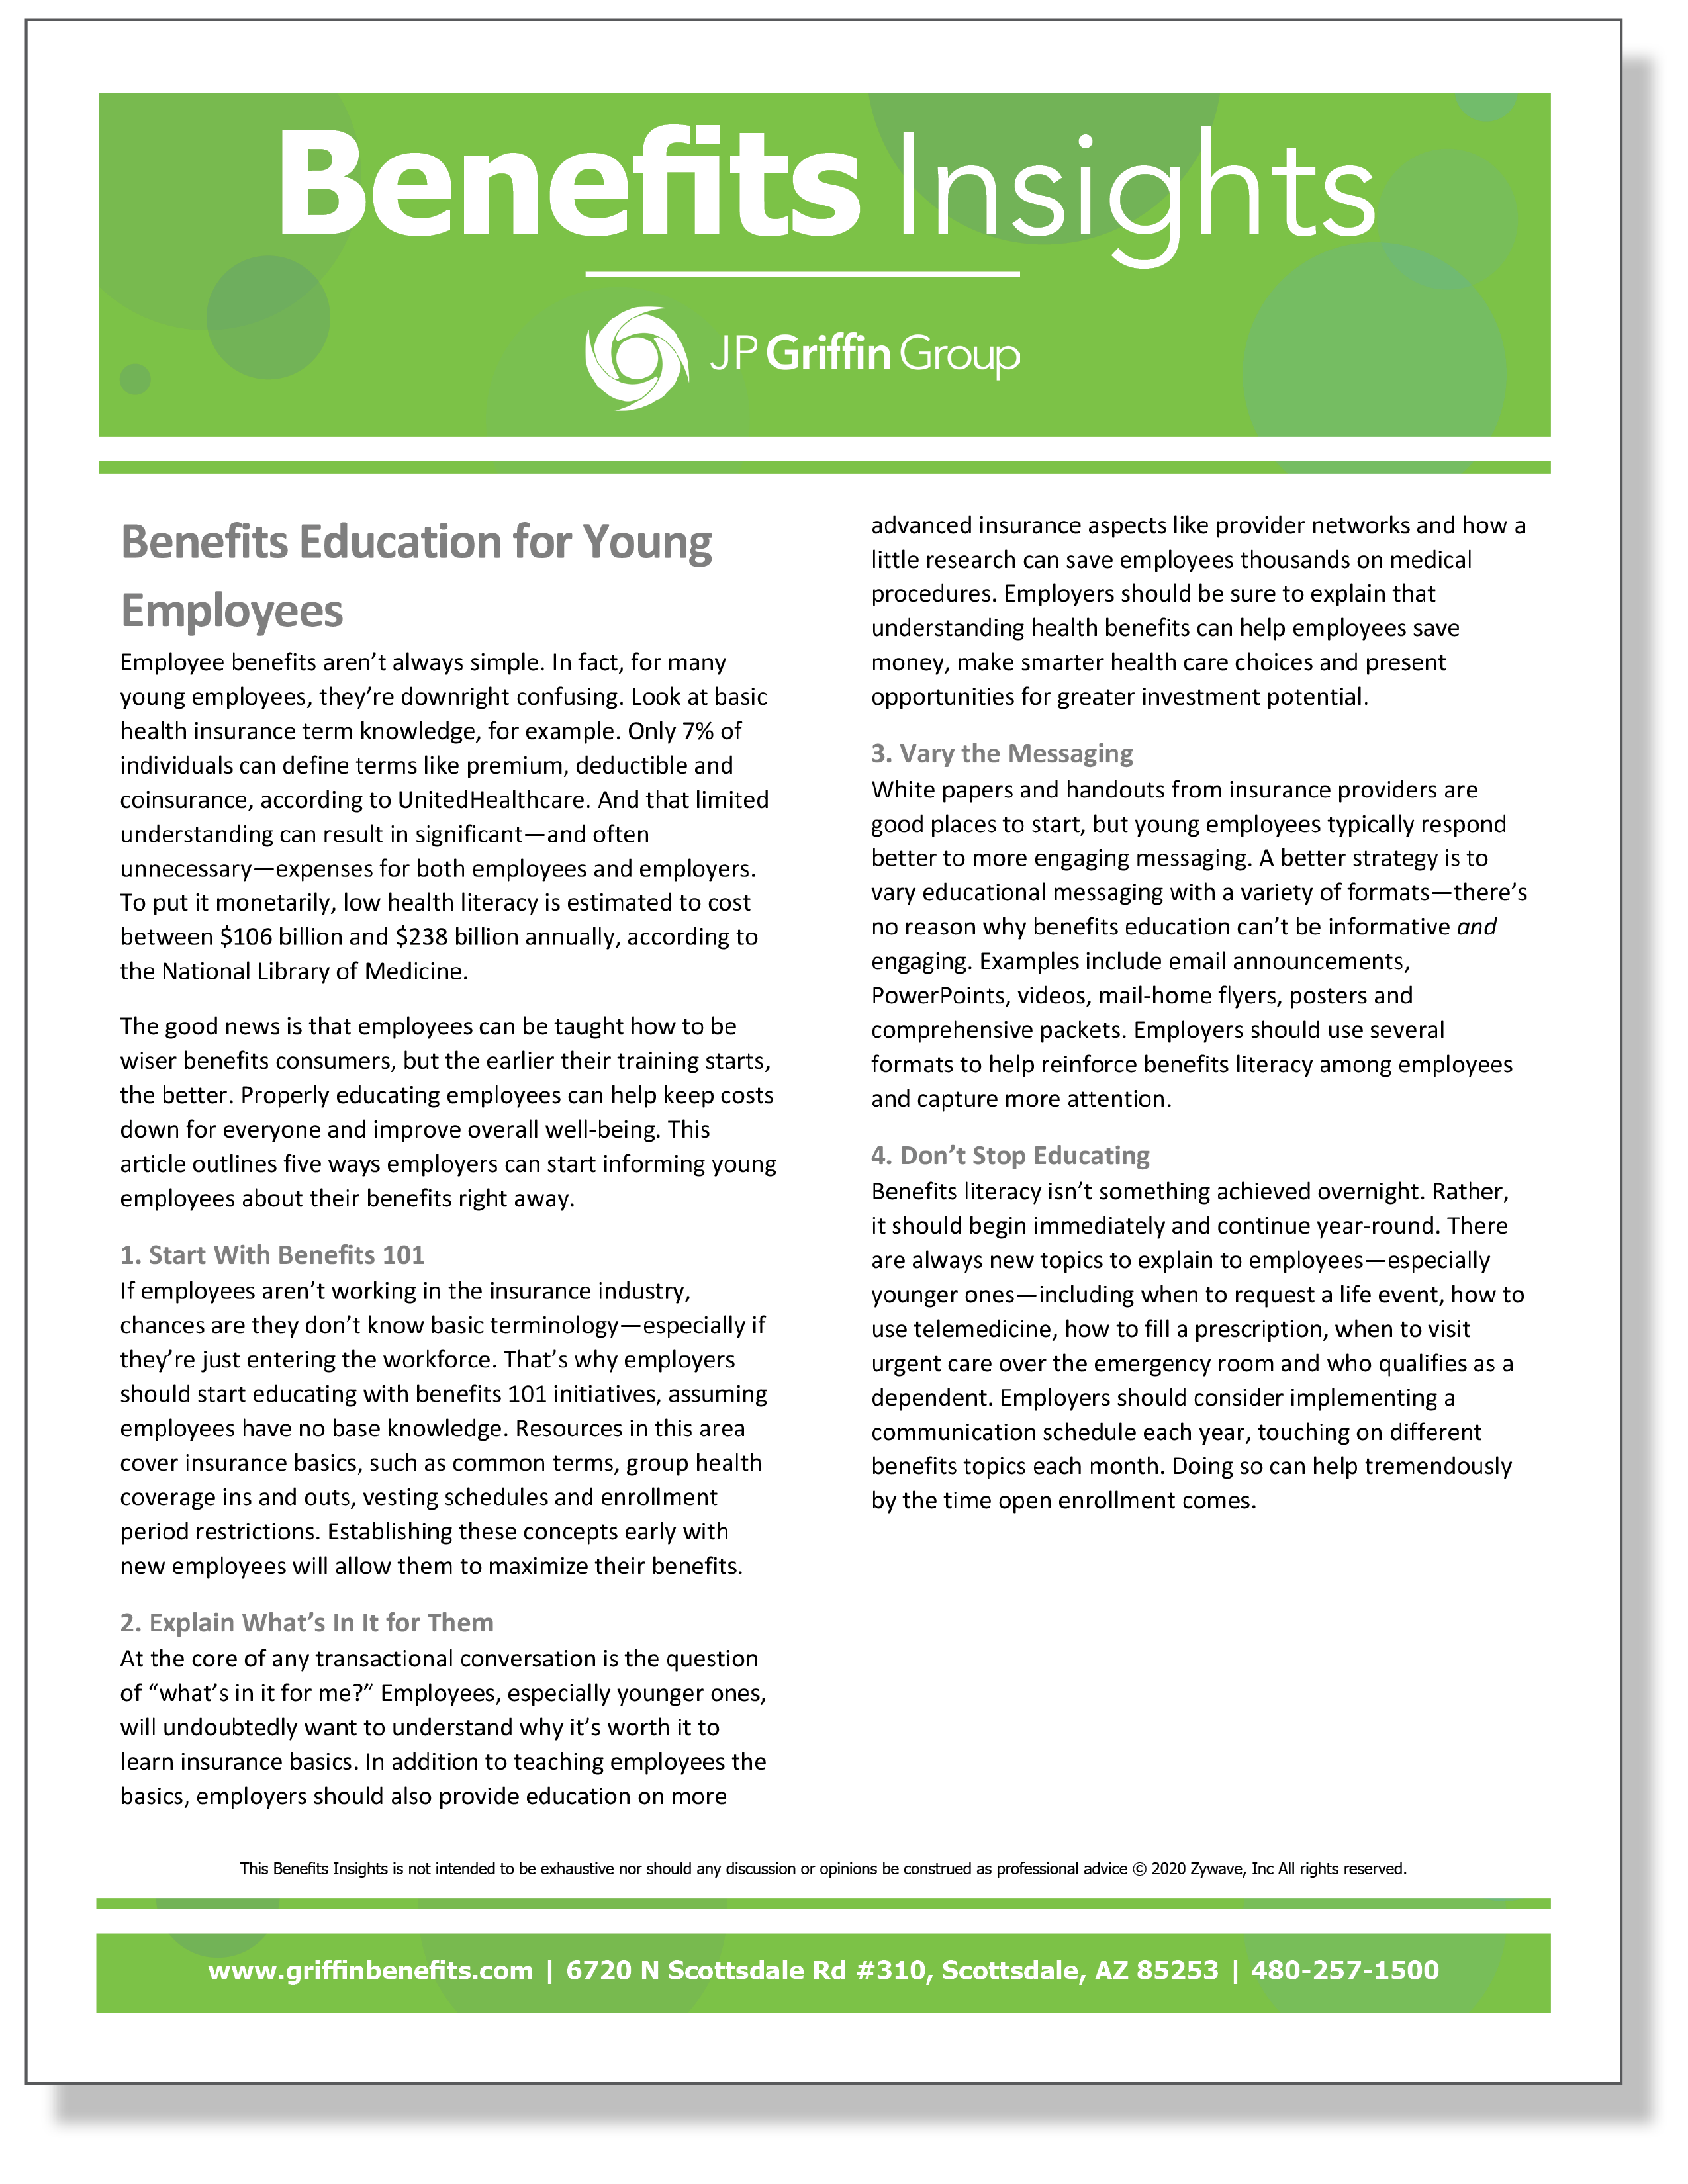 Benefits Education for Young Employees